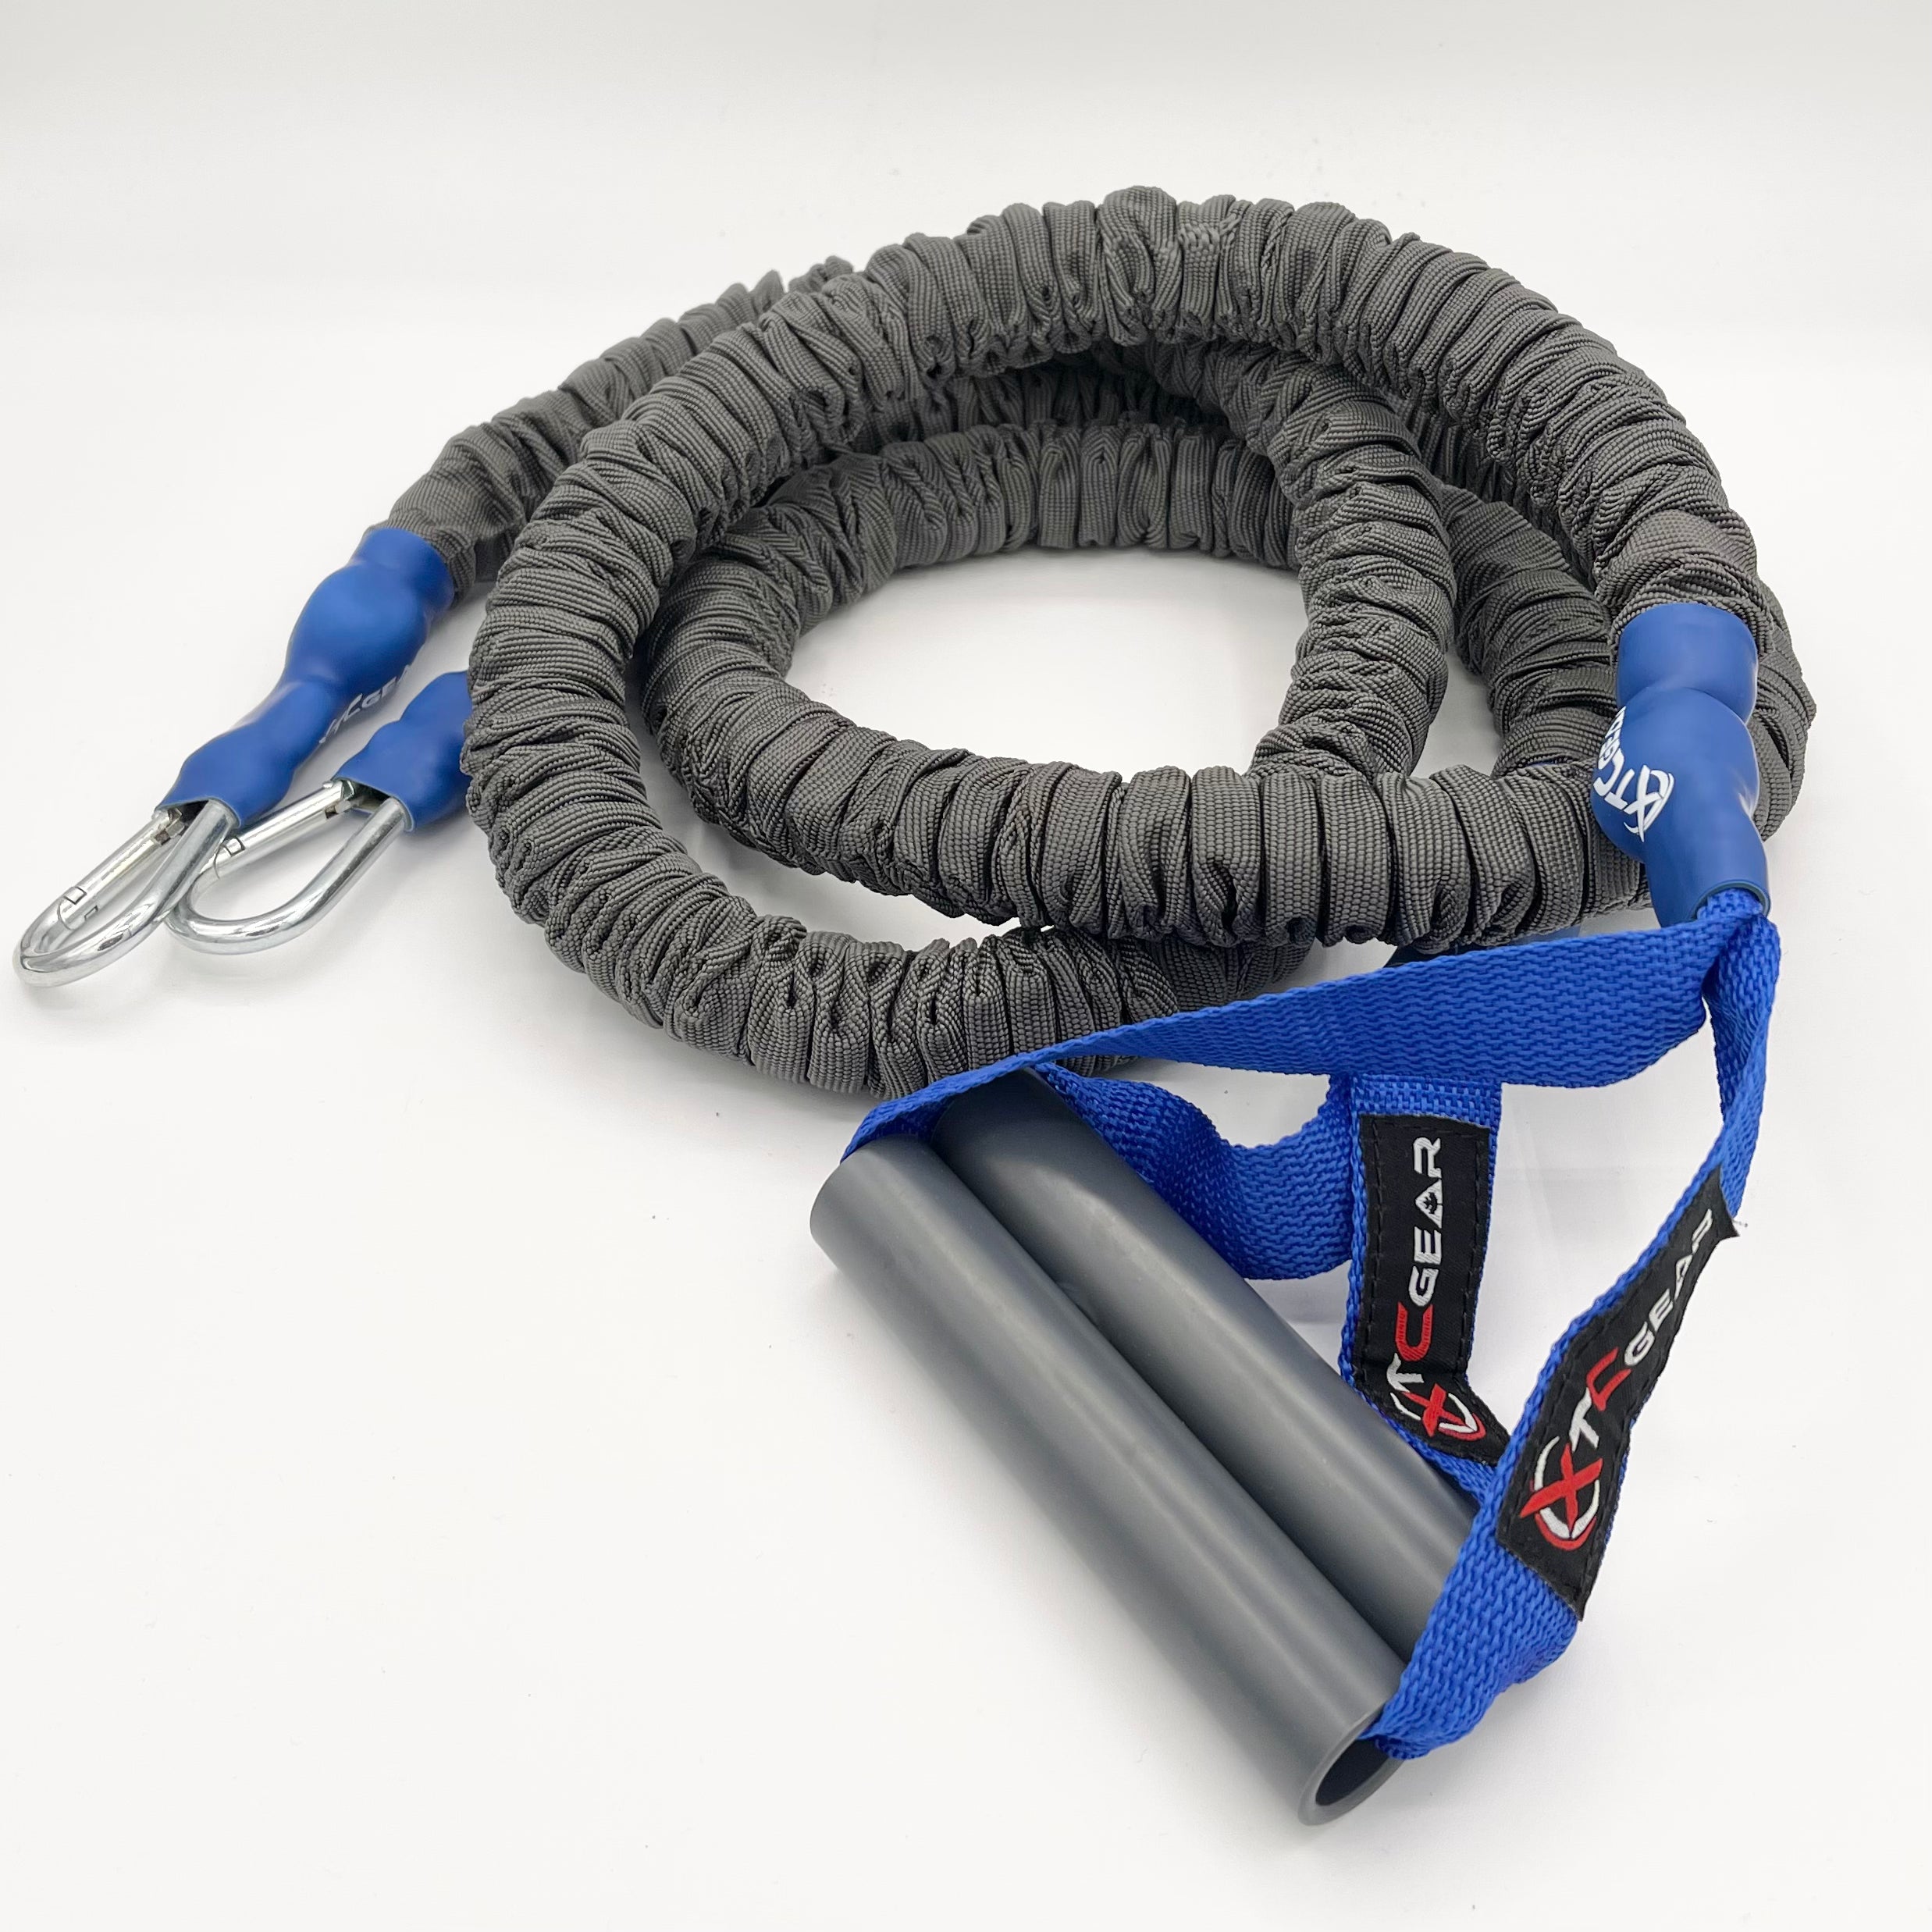 XTC Gear | X-Series Power Cords - XTC Fitness - Exercise Equipment Superstore - Canada - Resistance Cords